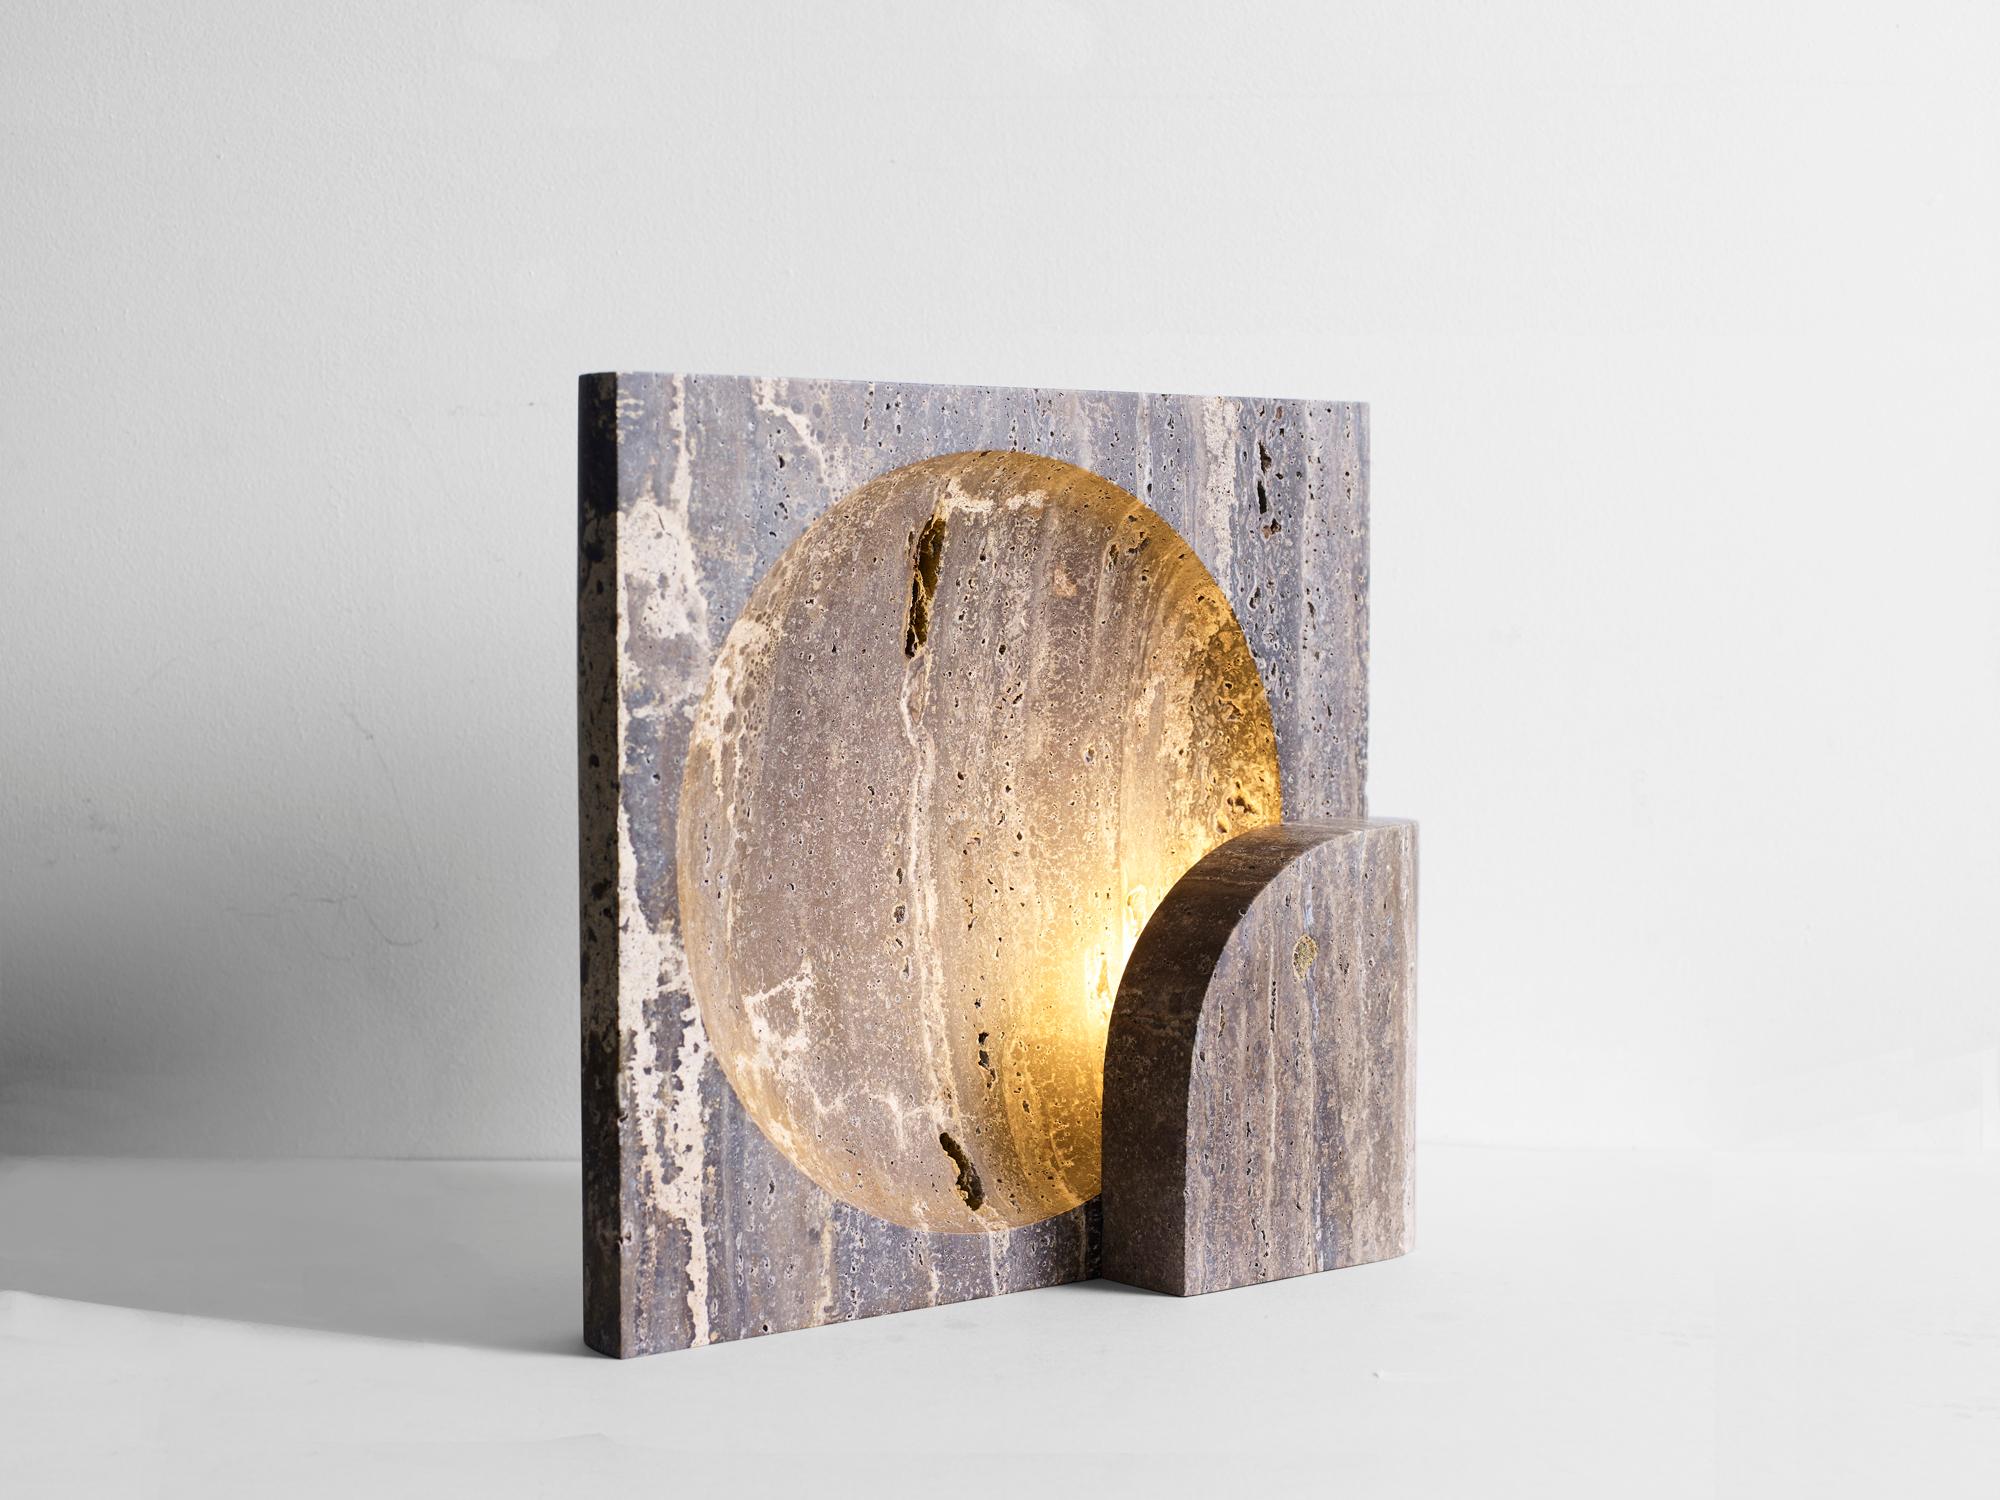 This sculptural item is handmade in Sydney, Australia.

This block table lamp is an ambient, sculptural light carved in two halves from solid stone.

Each light is manufactured in natural stone, meaning variations of the pattern in the stone will